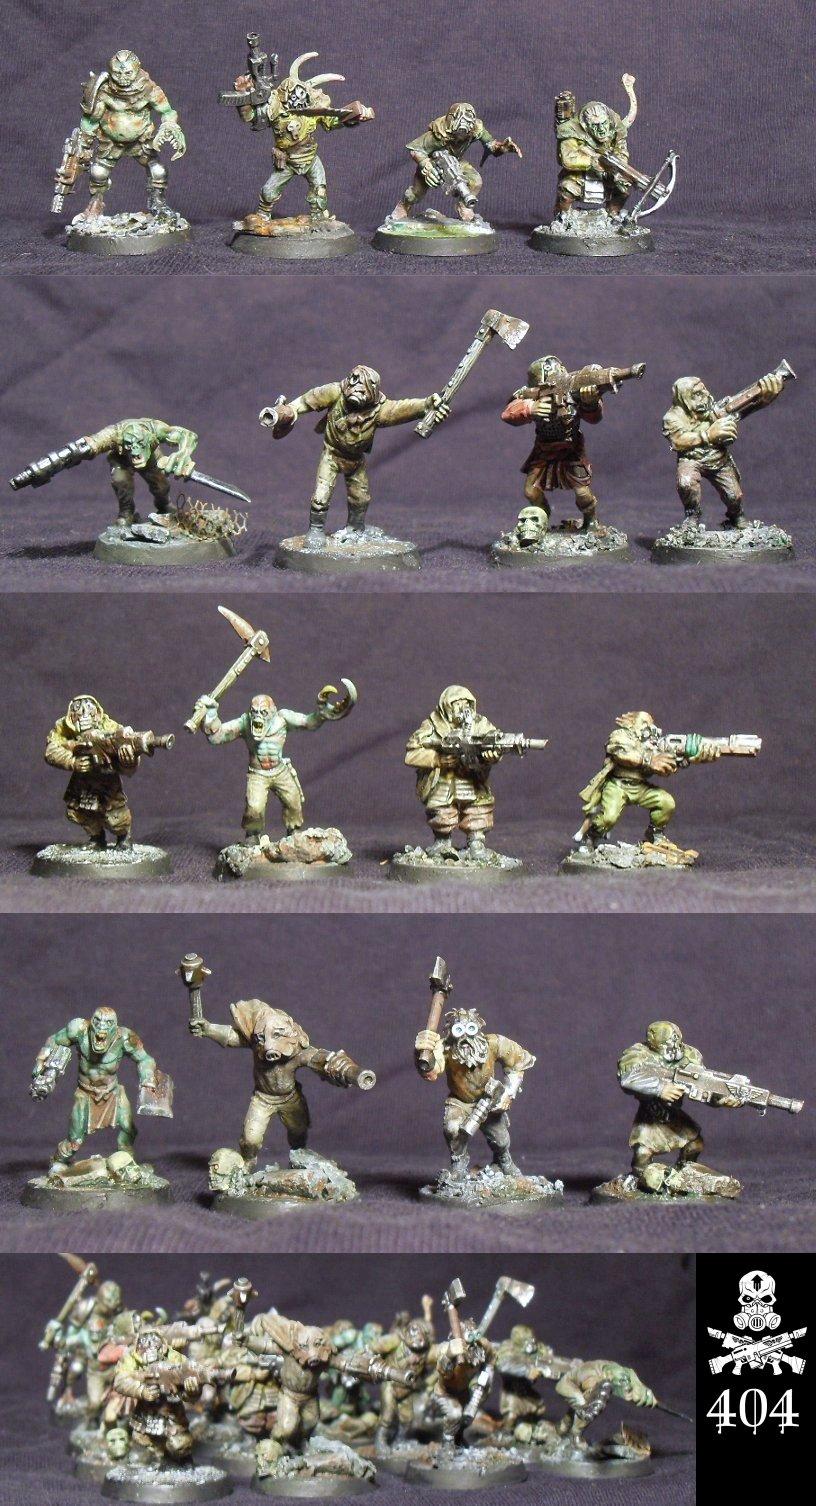 Chem-dogs, Conscript, Imperial Guard, Lost And The Damned, Mutant, Savlar, Scavvy, Scum